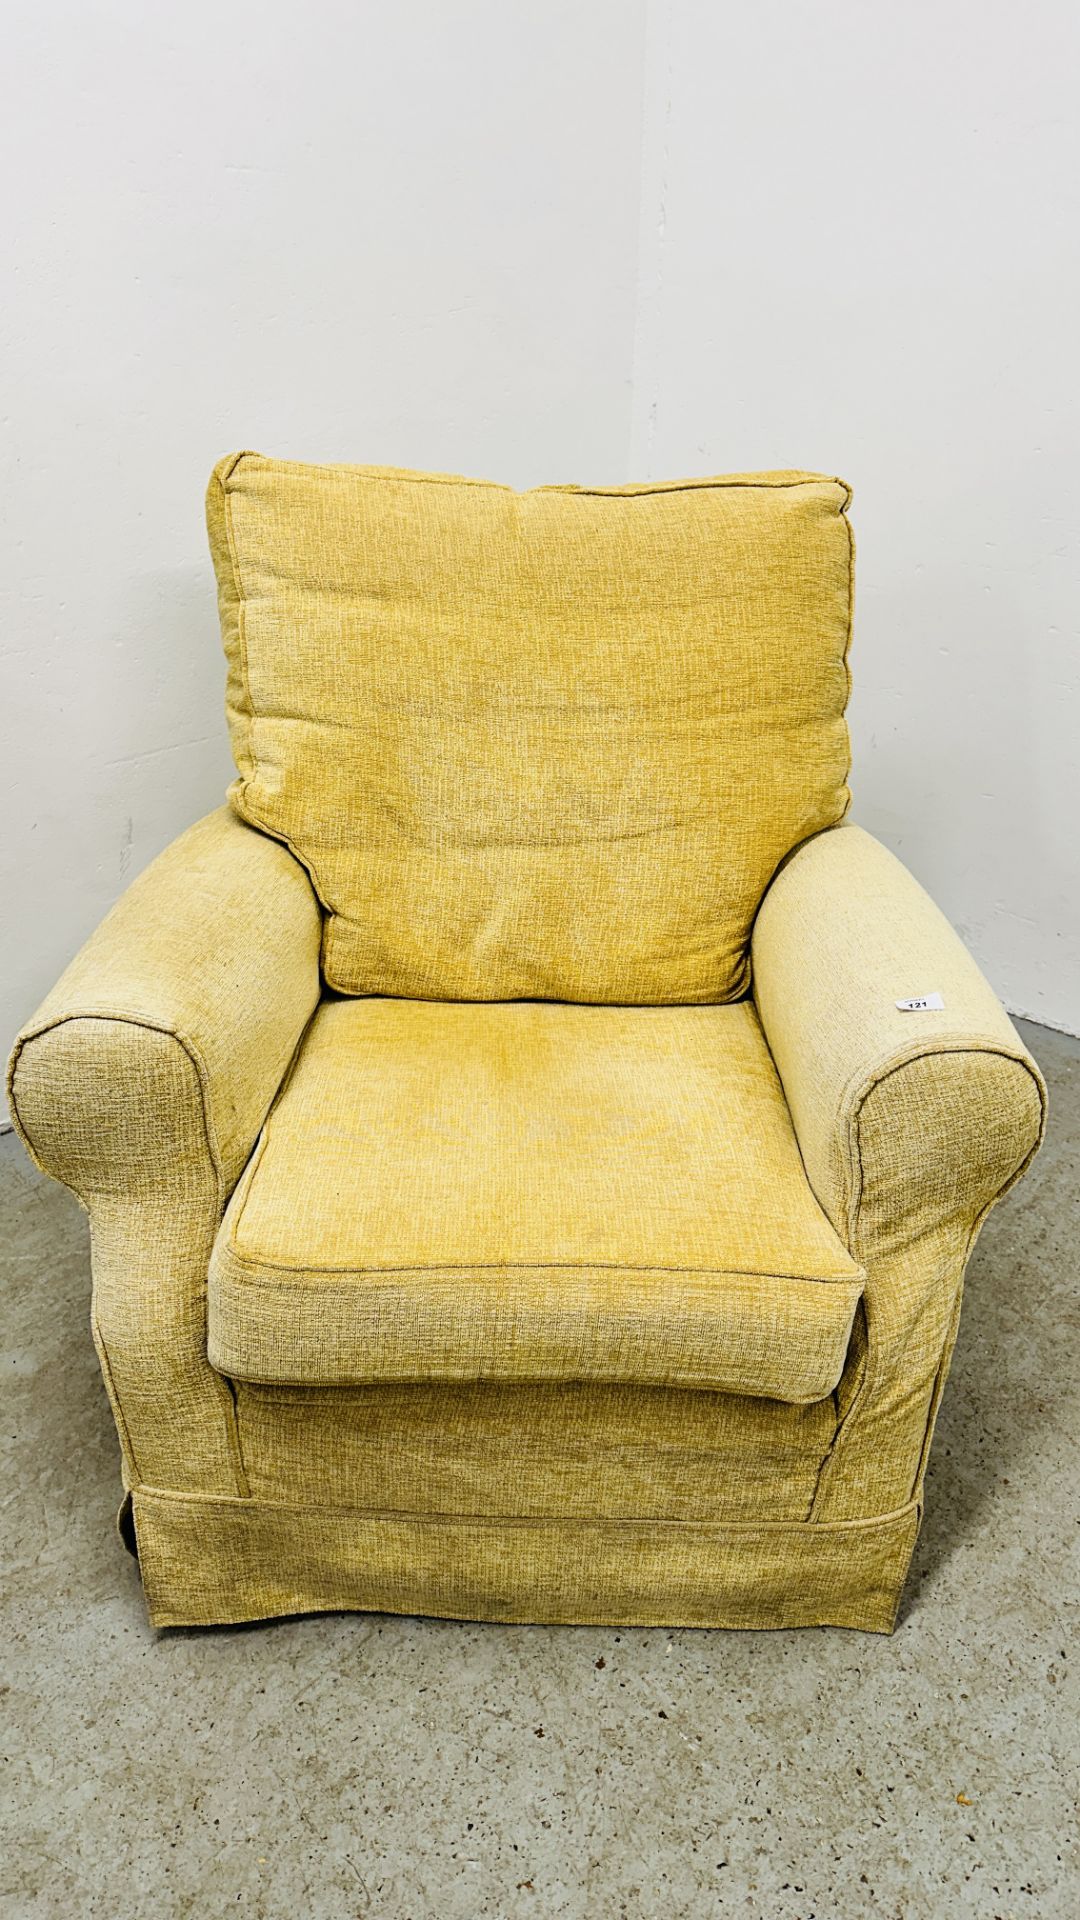 A GOOD QUALITY PRIMROSE UPHOLSTERED EASY CHAIR.